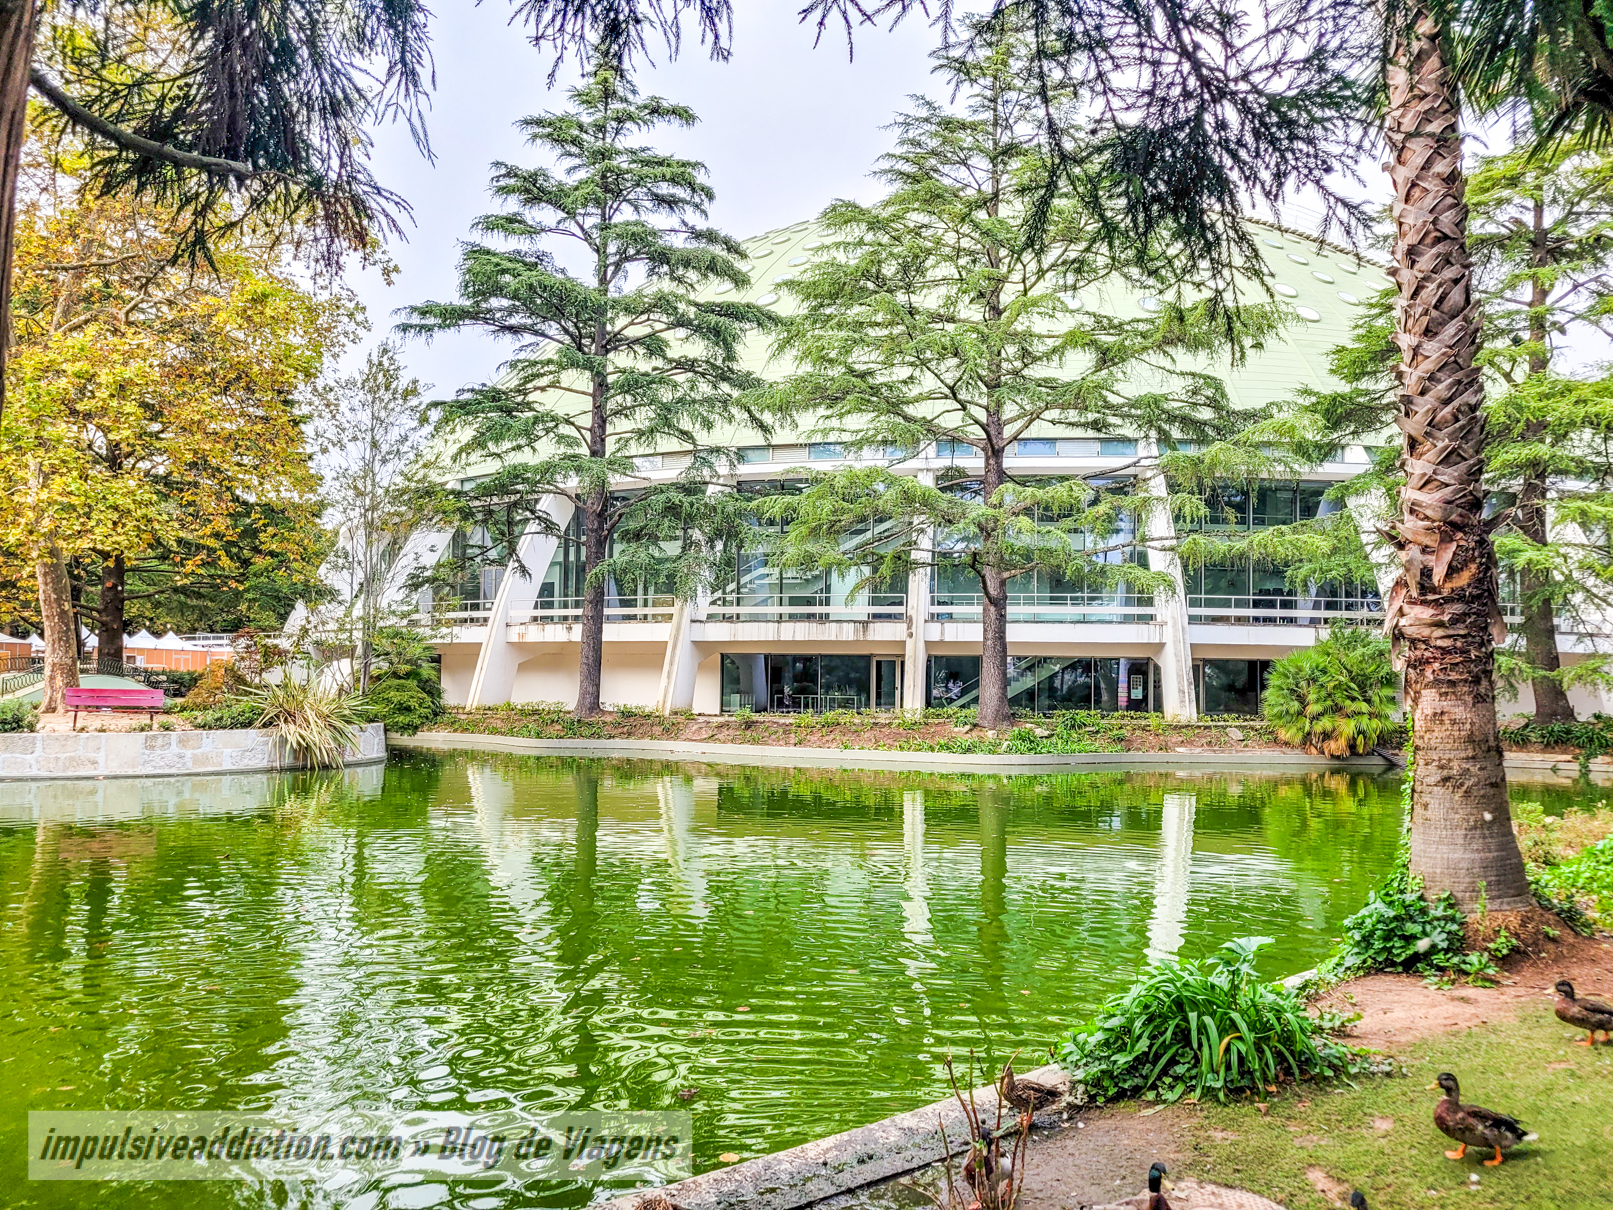 Visit Crystal Palace Gardens | Things to do in Porto